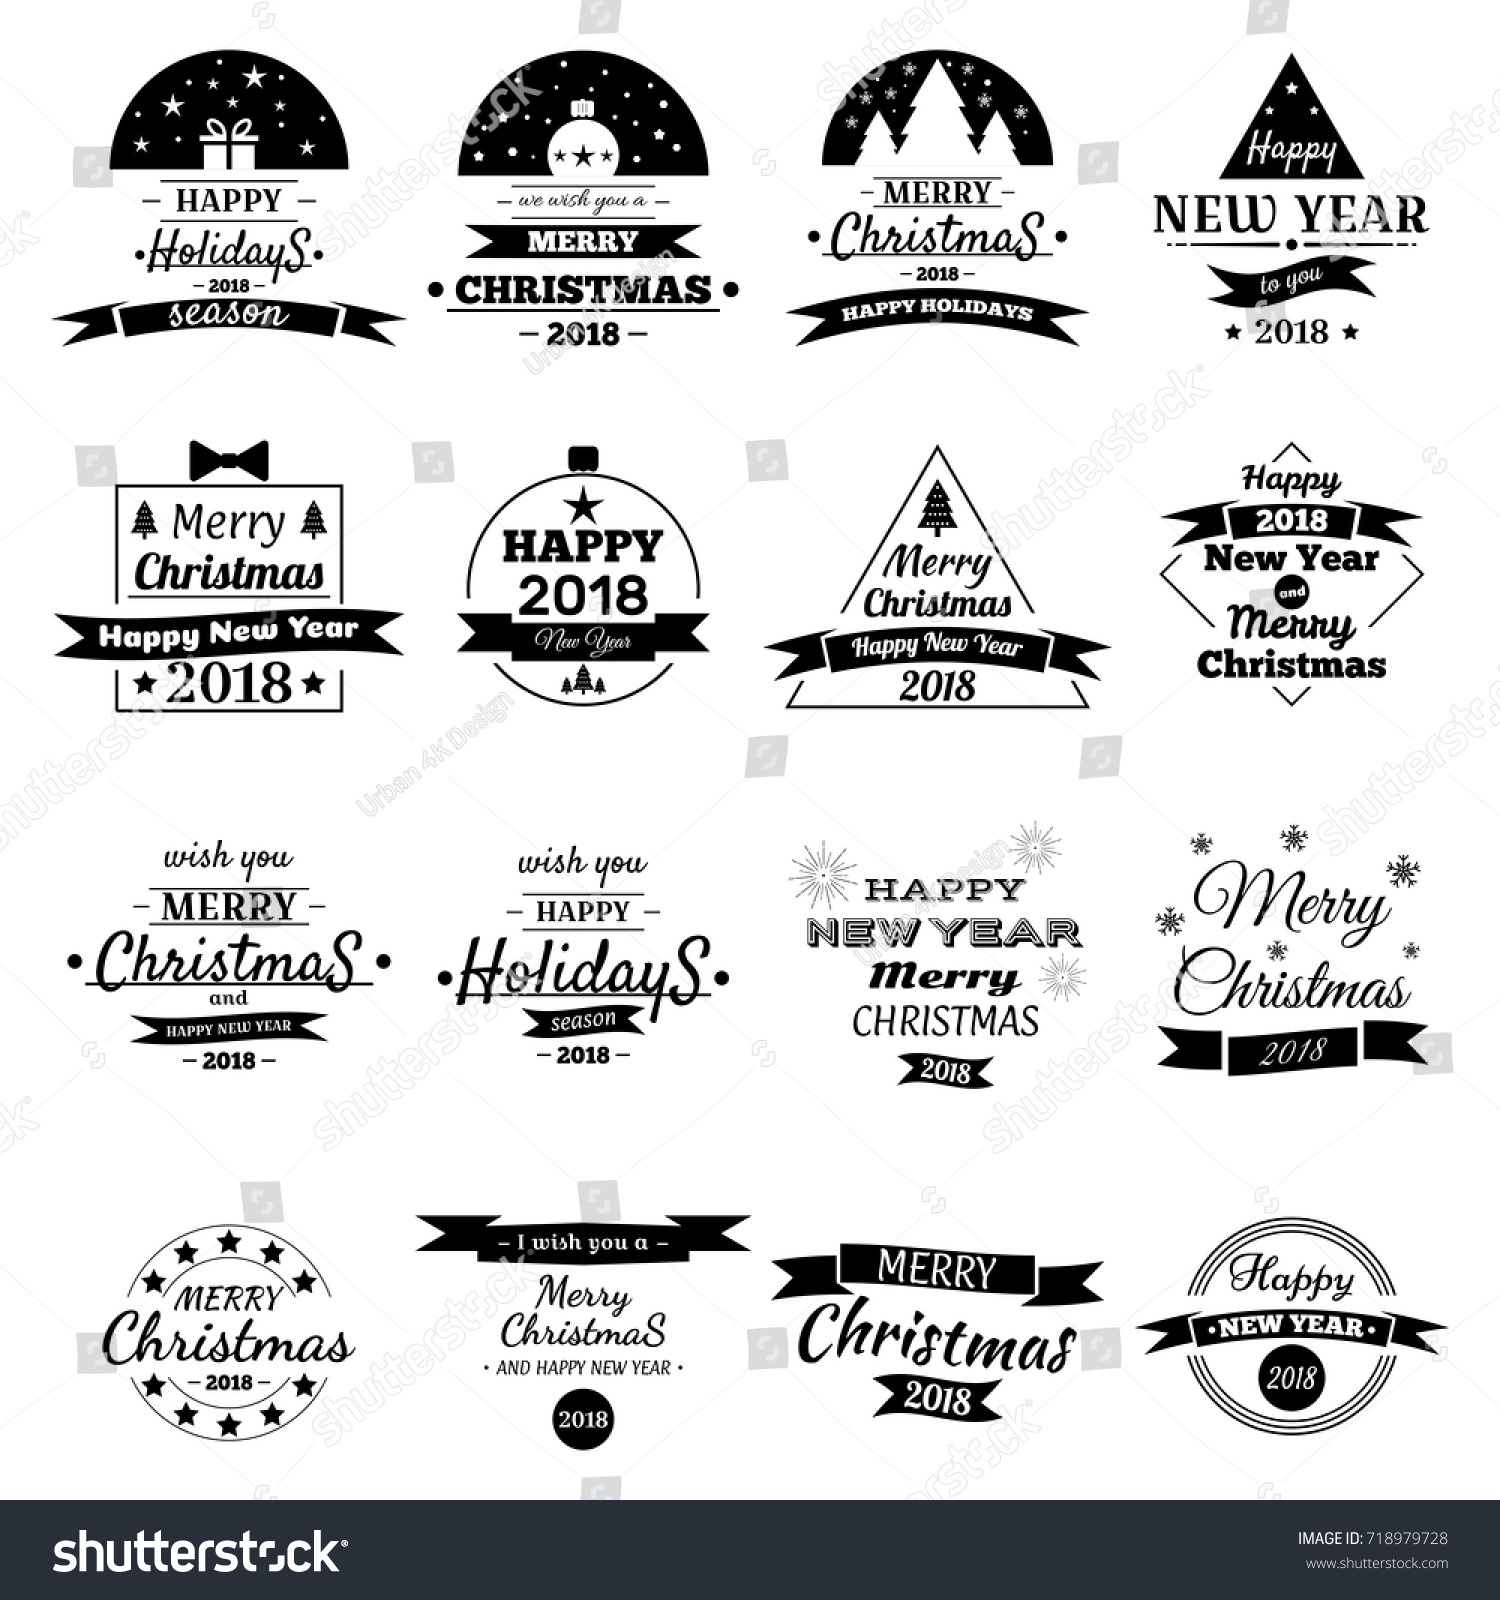 Merry Christmas & Happy New Year 2018 Typography set Vector logos emblems